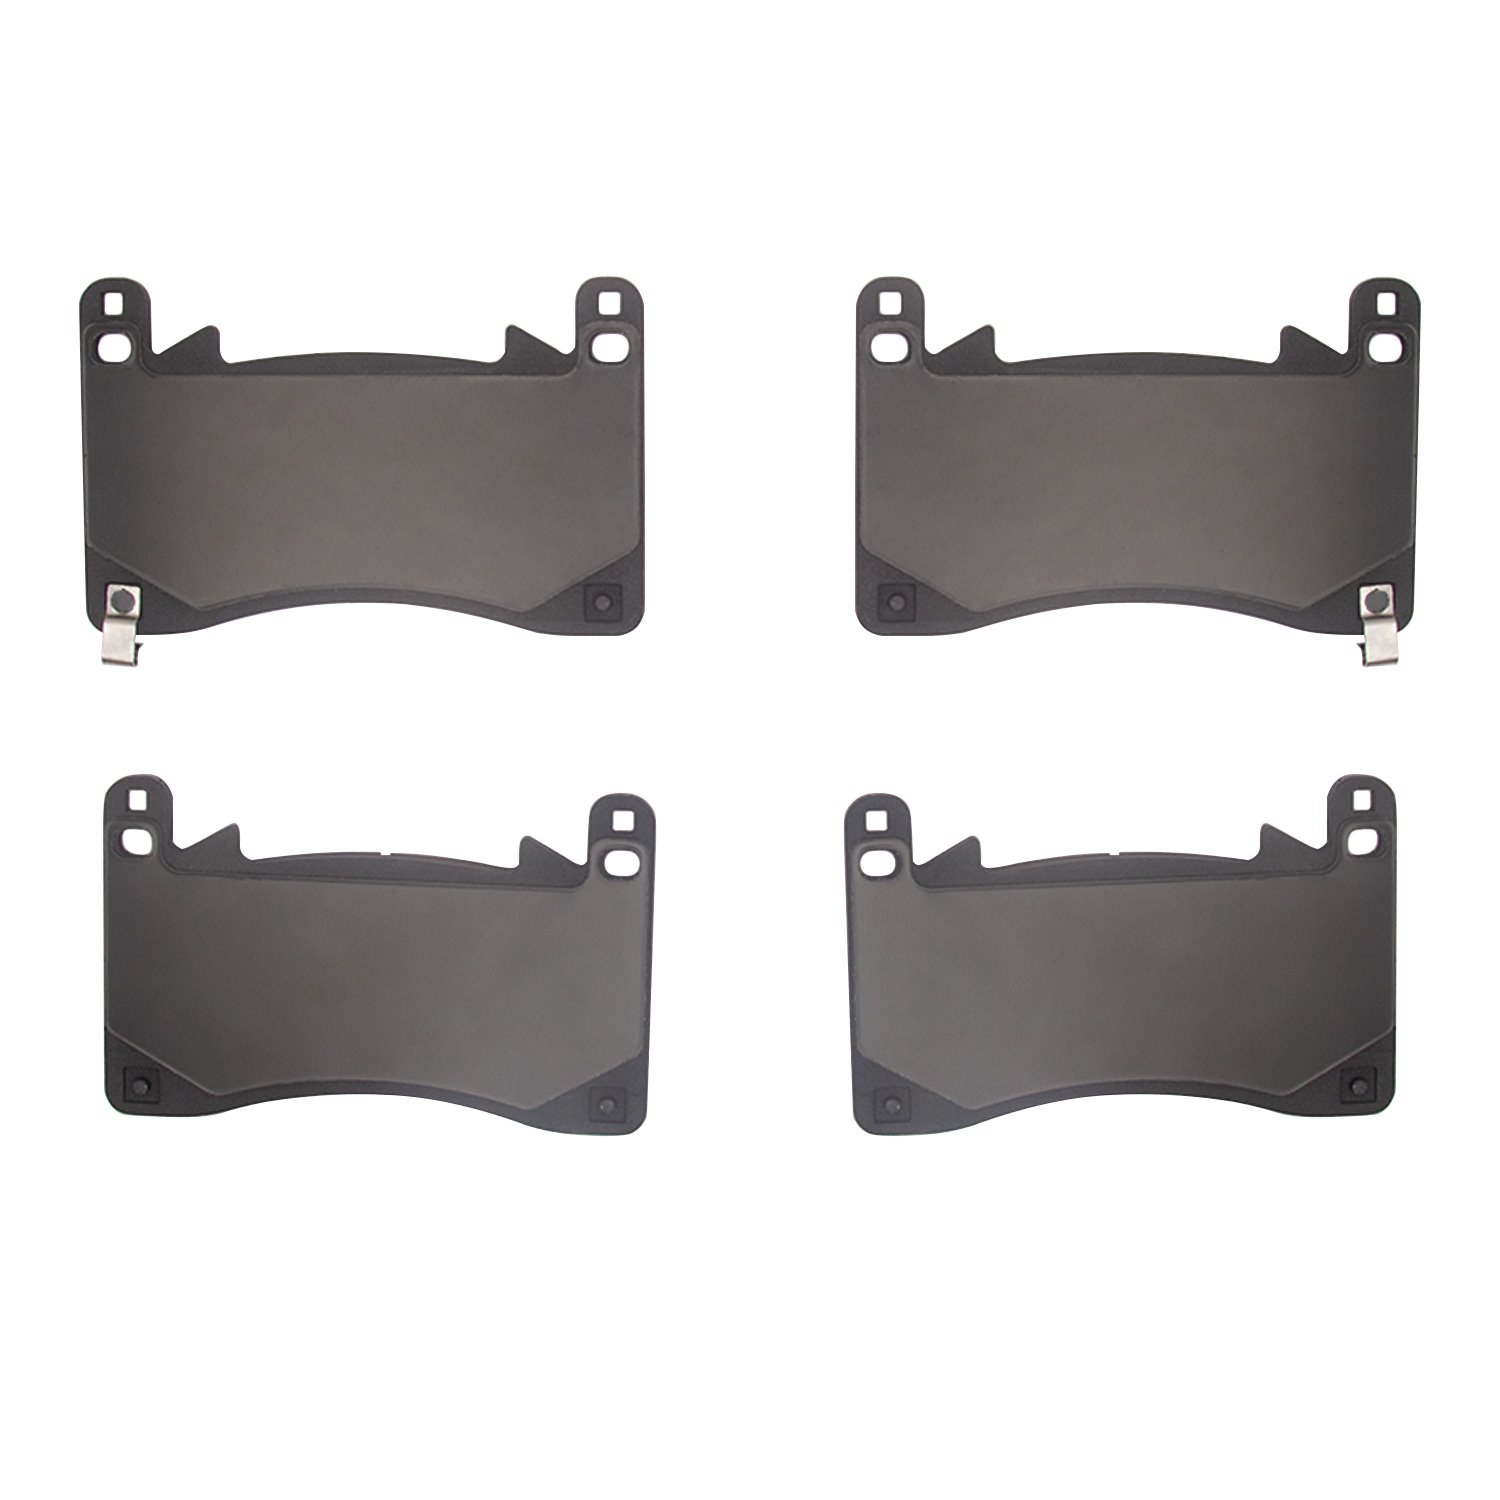 1551-2418-00 5000 Advanced Ceramic Brake Pads, Fits Select Acura/Honda, Position: Front